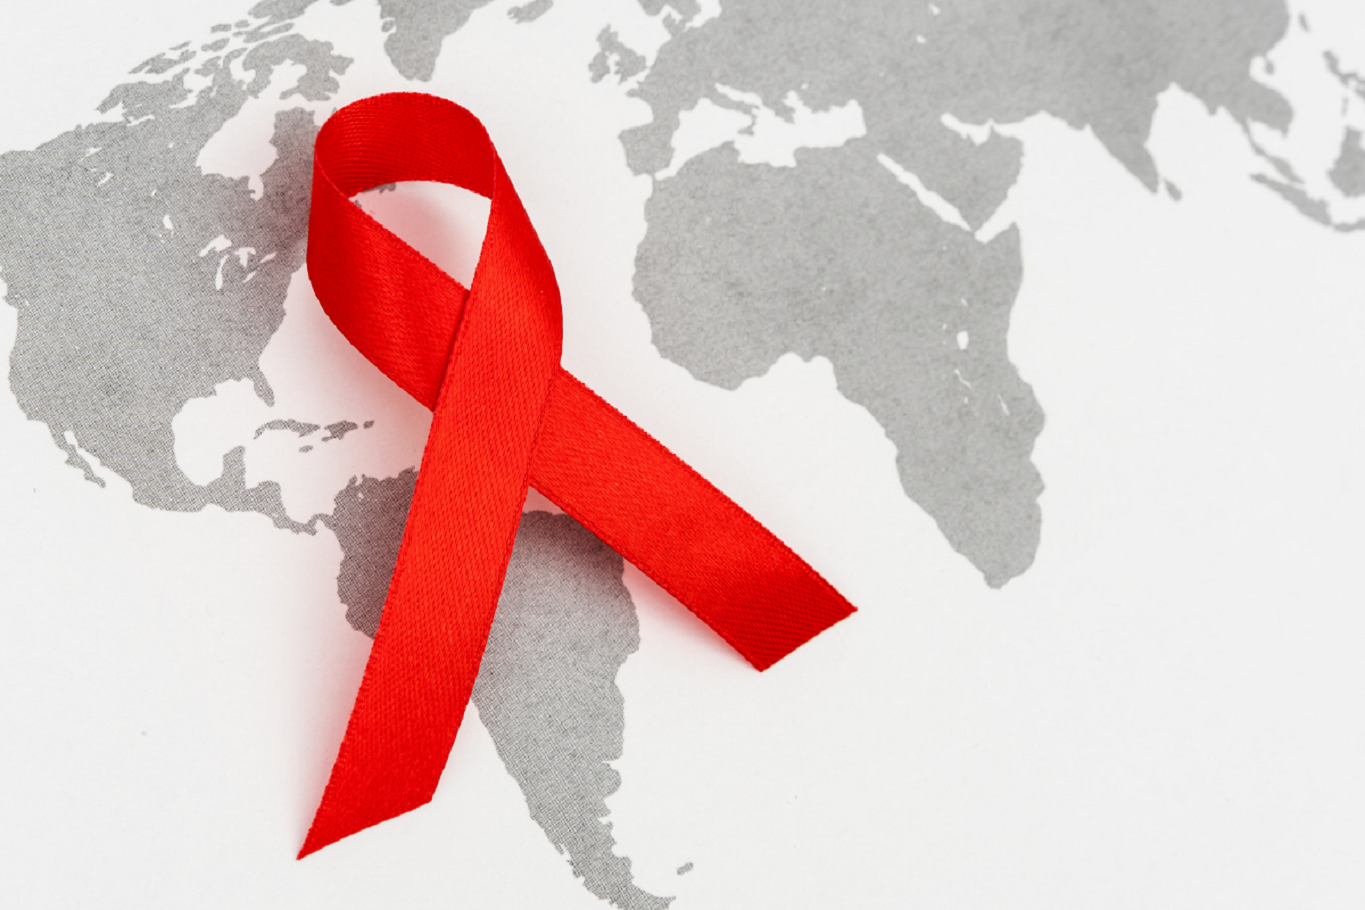 Is there something more sinister than money behind the “new HIV” scare?